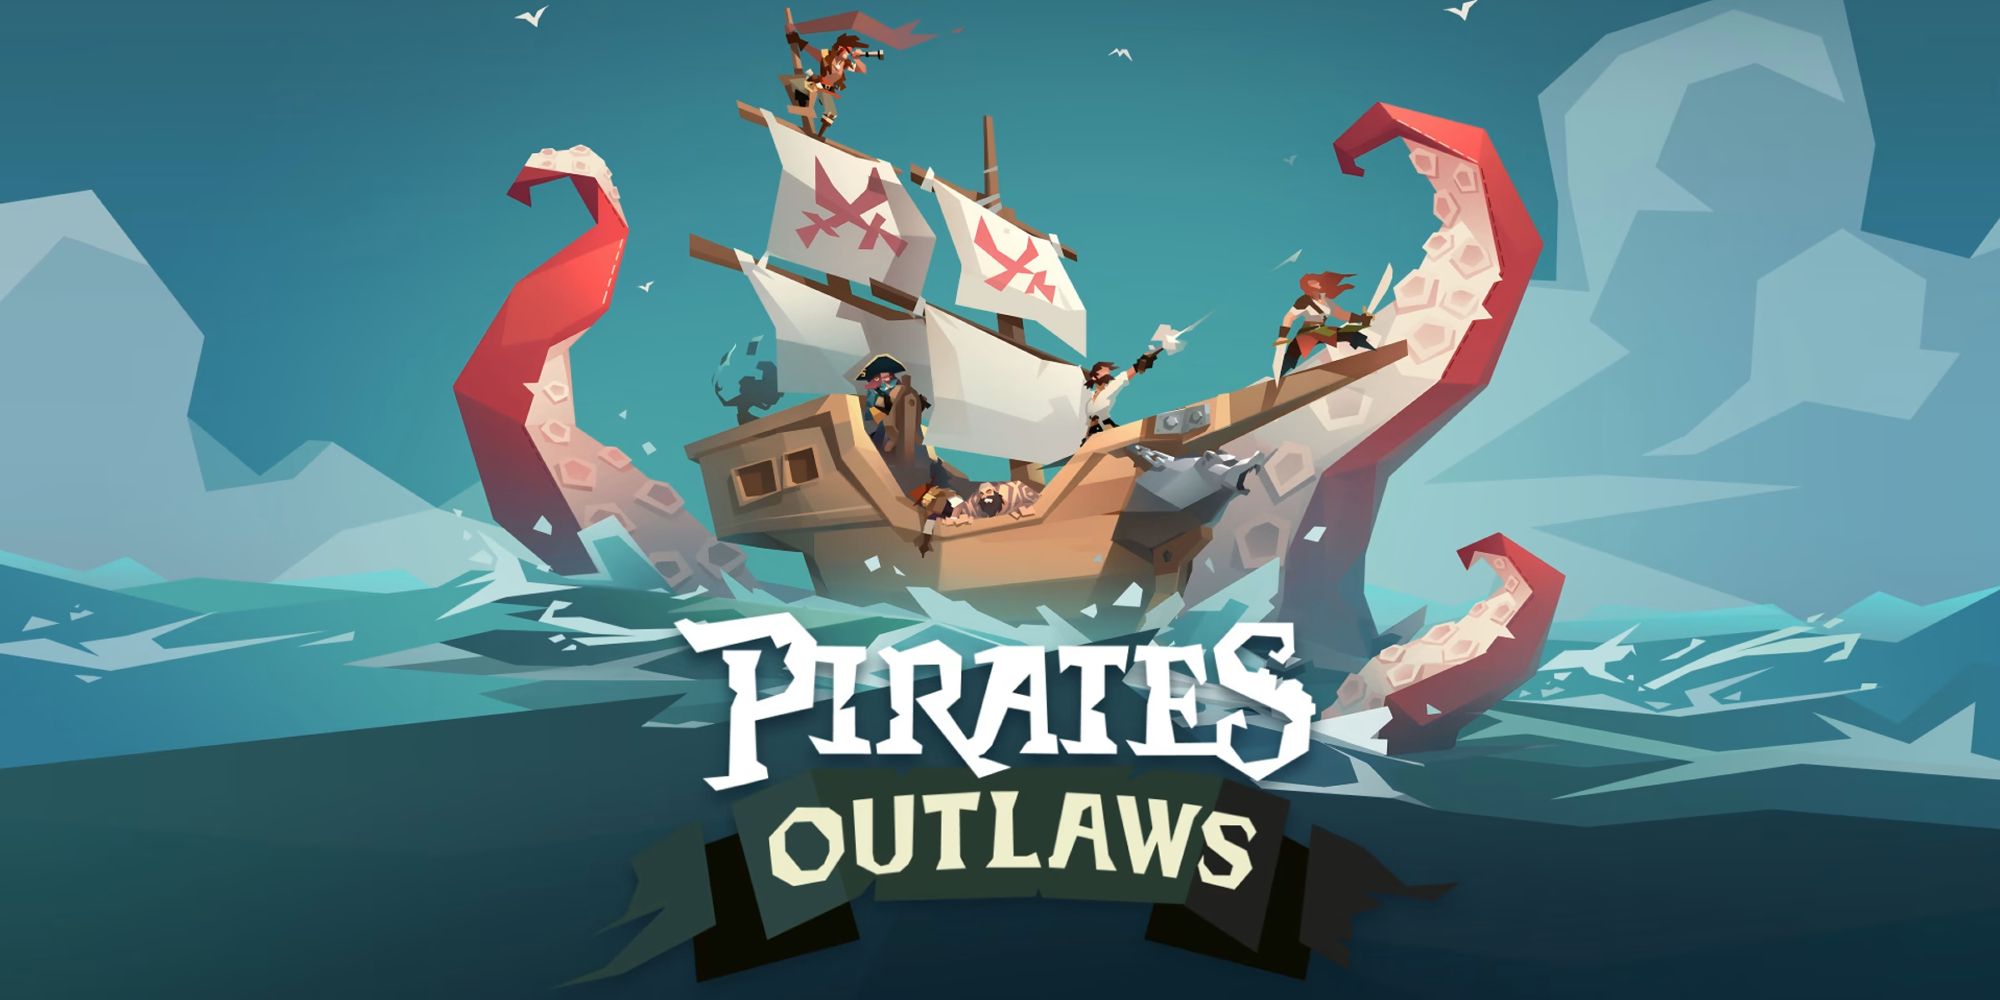 Pirate Outlaws Titles Art Showing Pirates Fighting A Monster On Their Ship